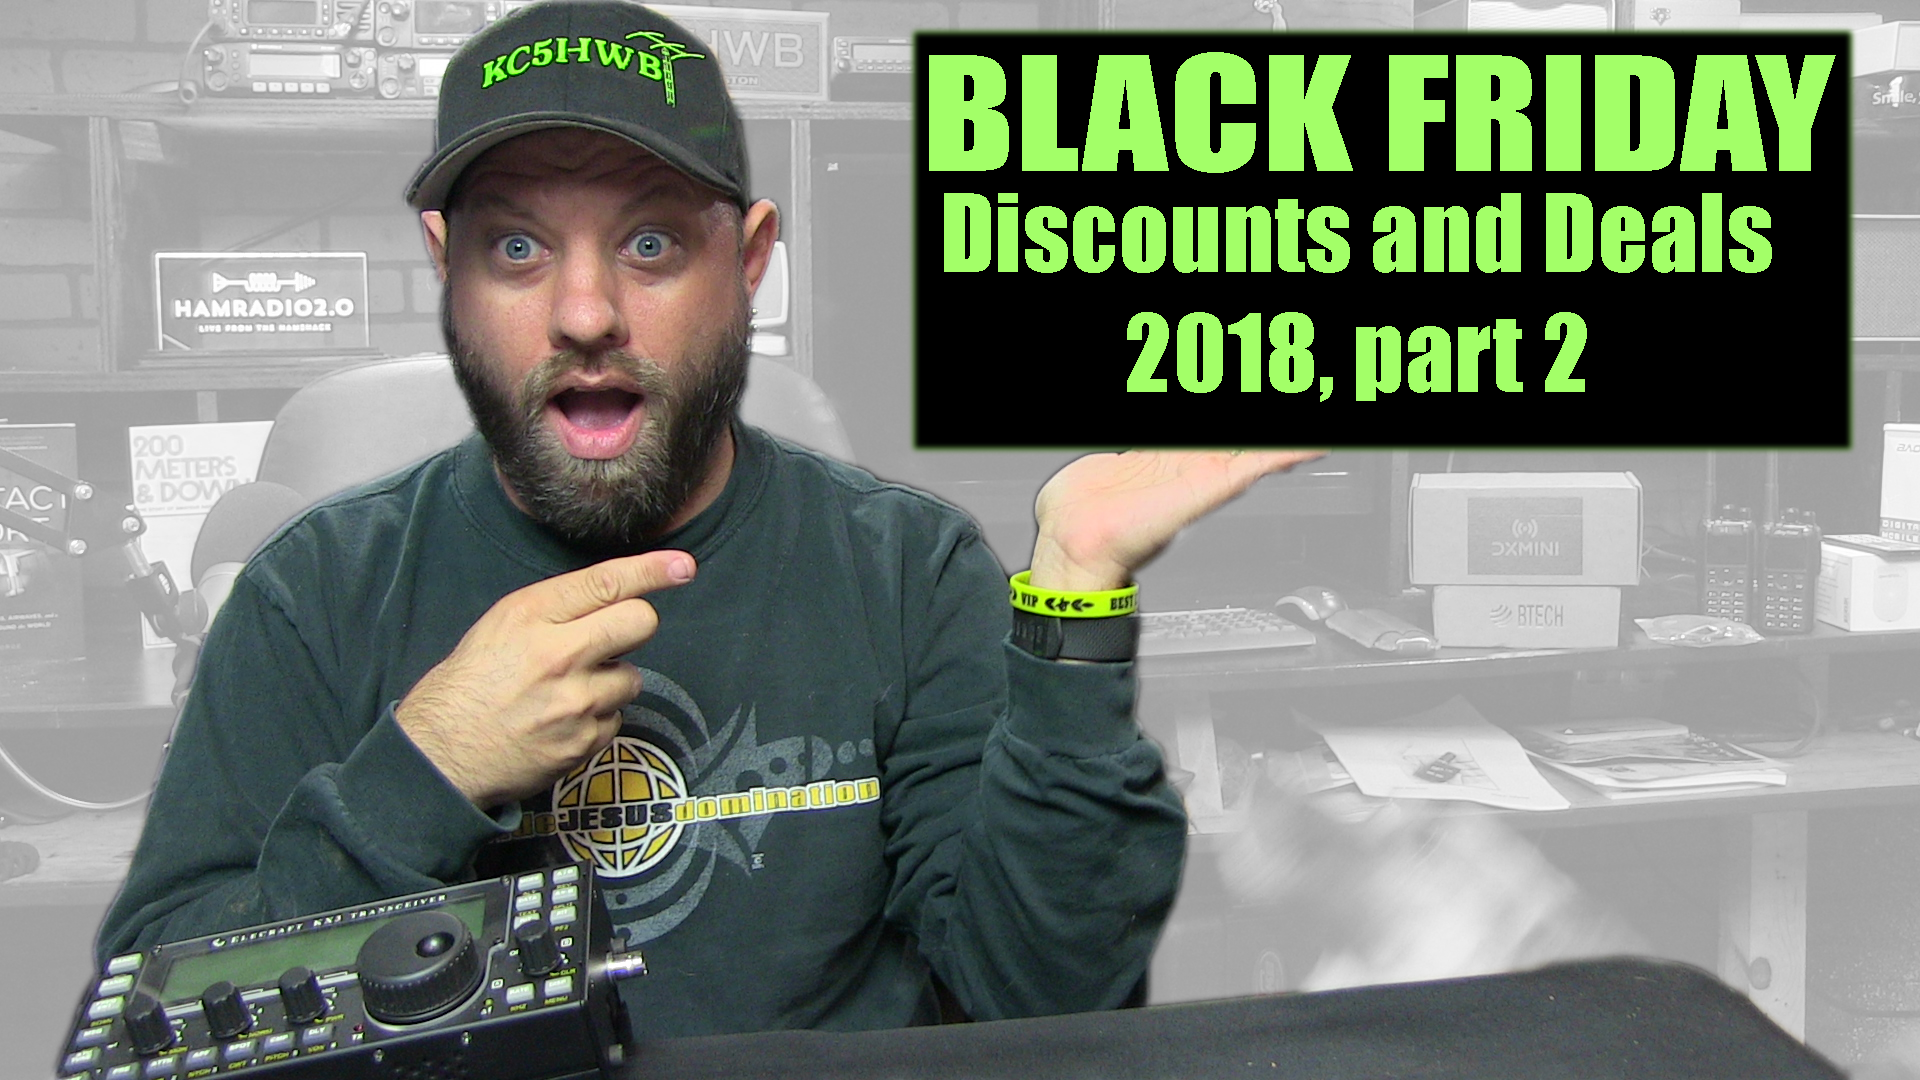 Episode 165: Black Friday Specials for 2018, part 2